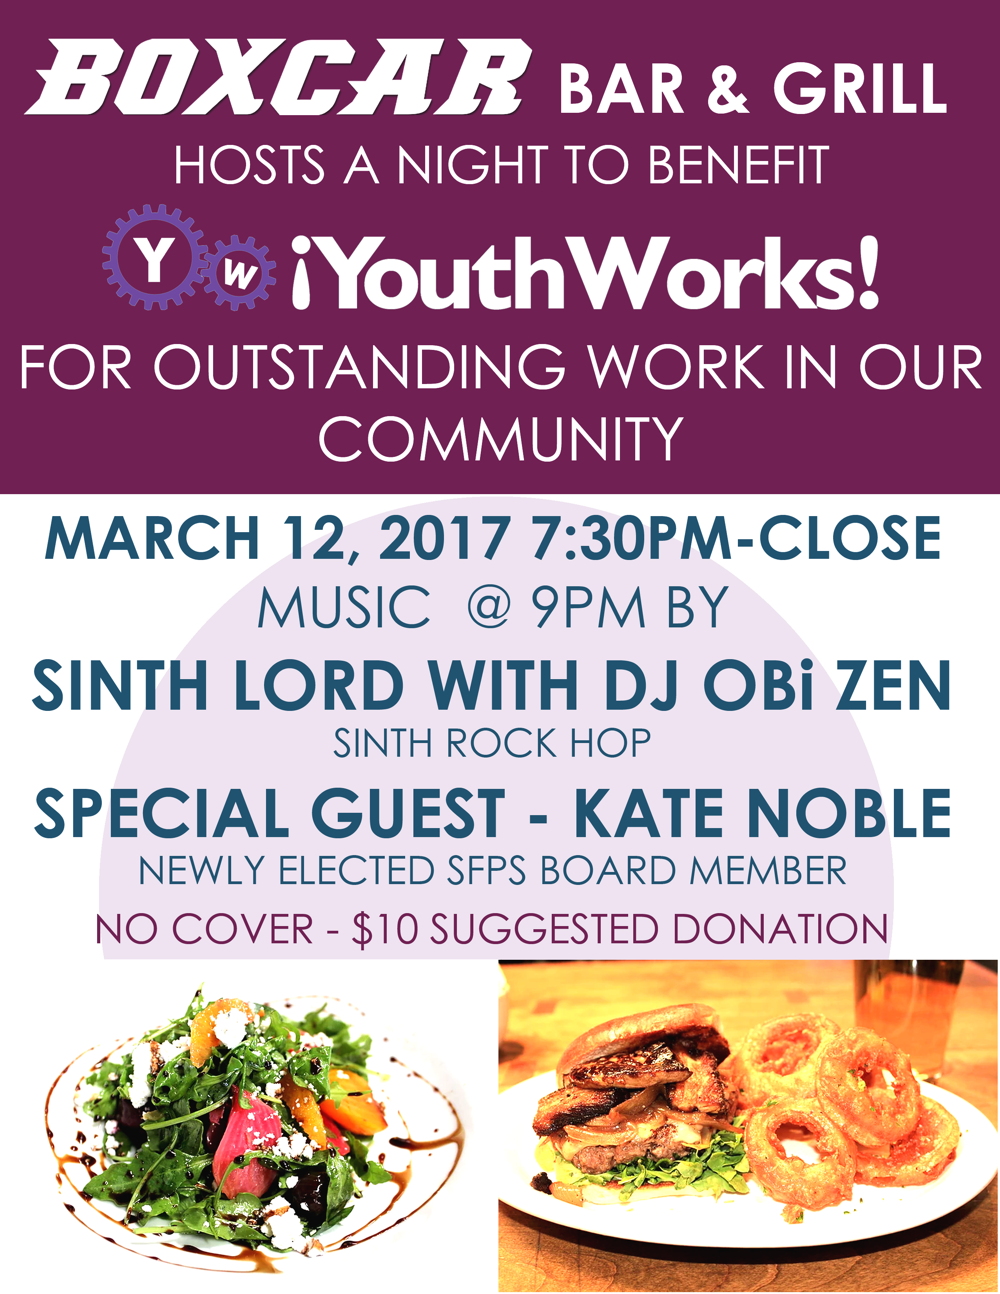 Boxcar Bar & Grill hosts a benefit for !YouthWorks! to honor their work in the Santa Fe Community.